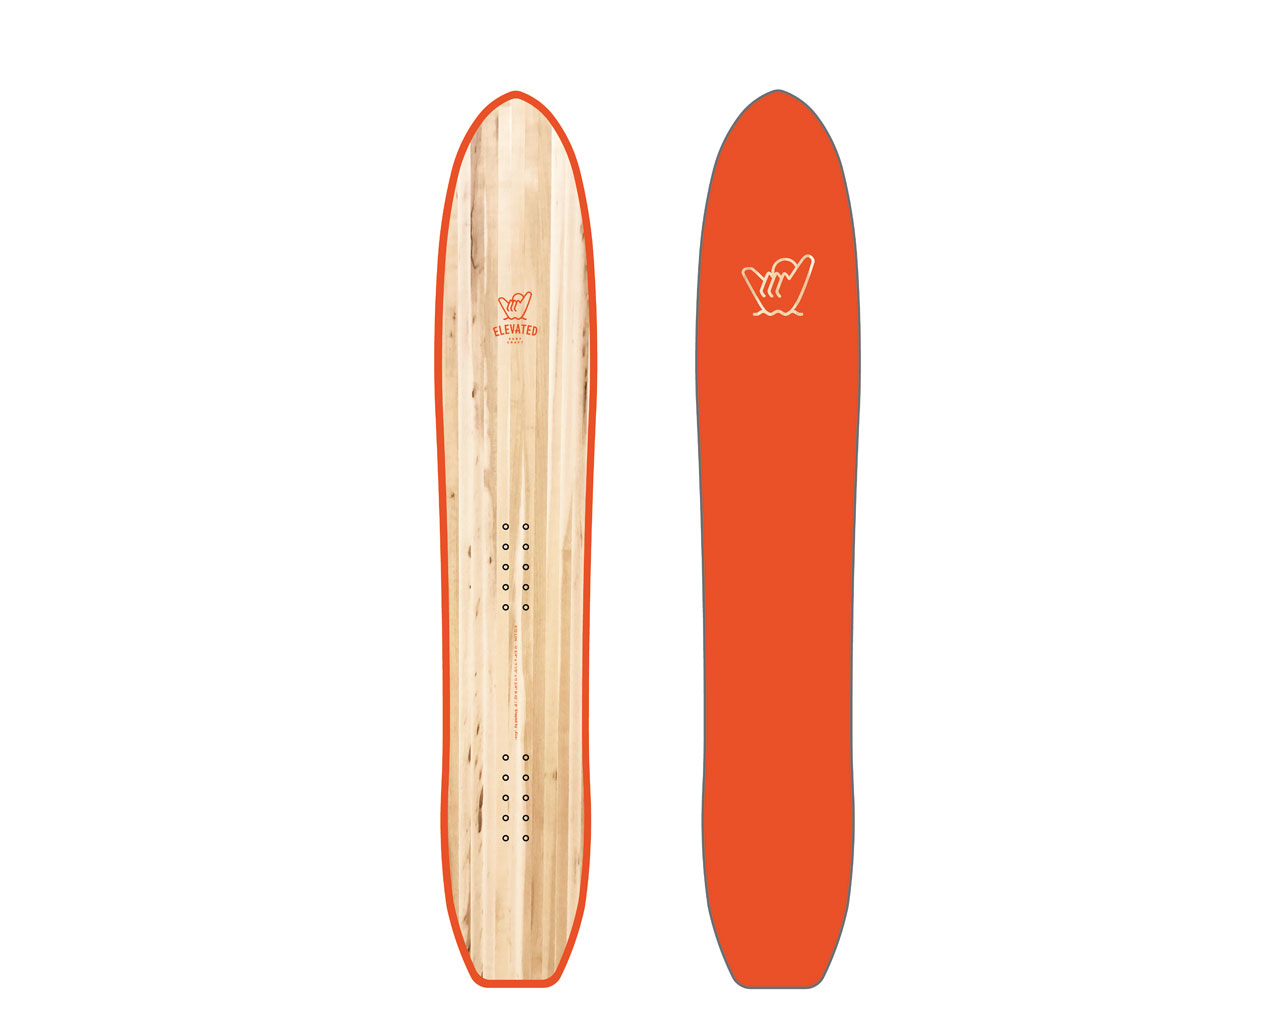 Elevated Surfcraft FW20/21 Snowboard Preview